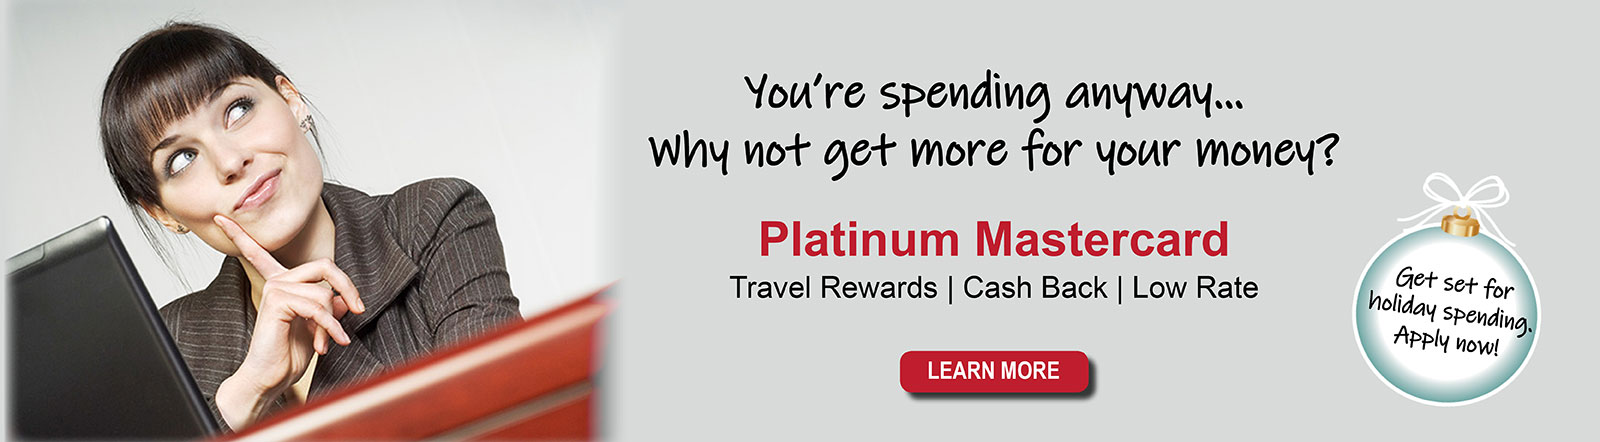 You're spending anyway. Why not get more for your money with Platinum Mastercard